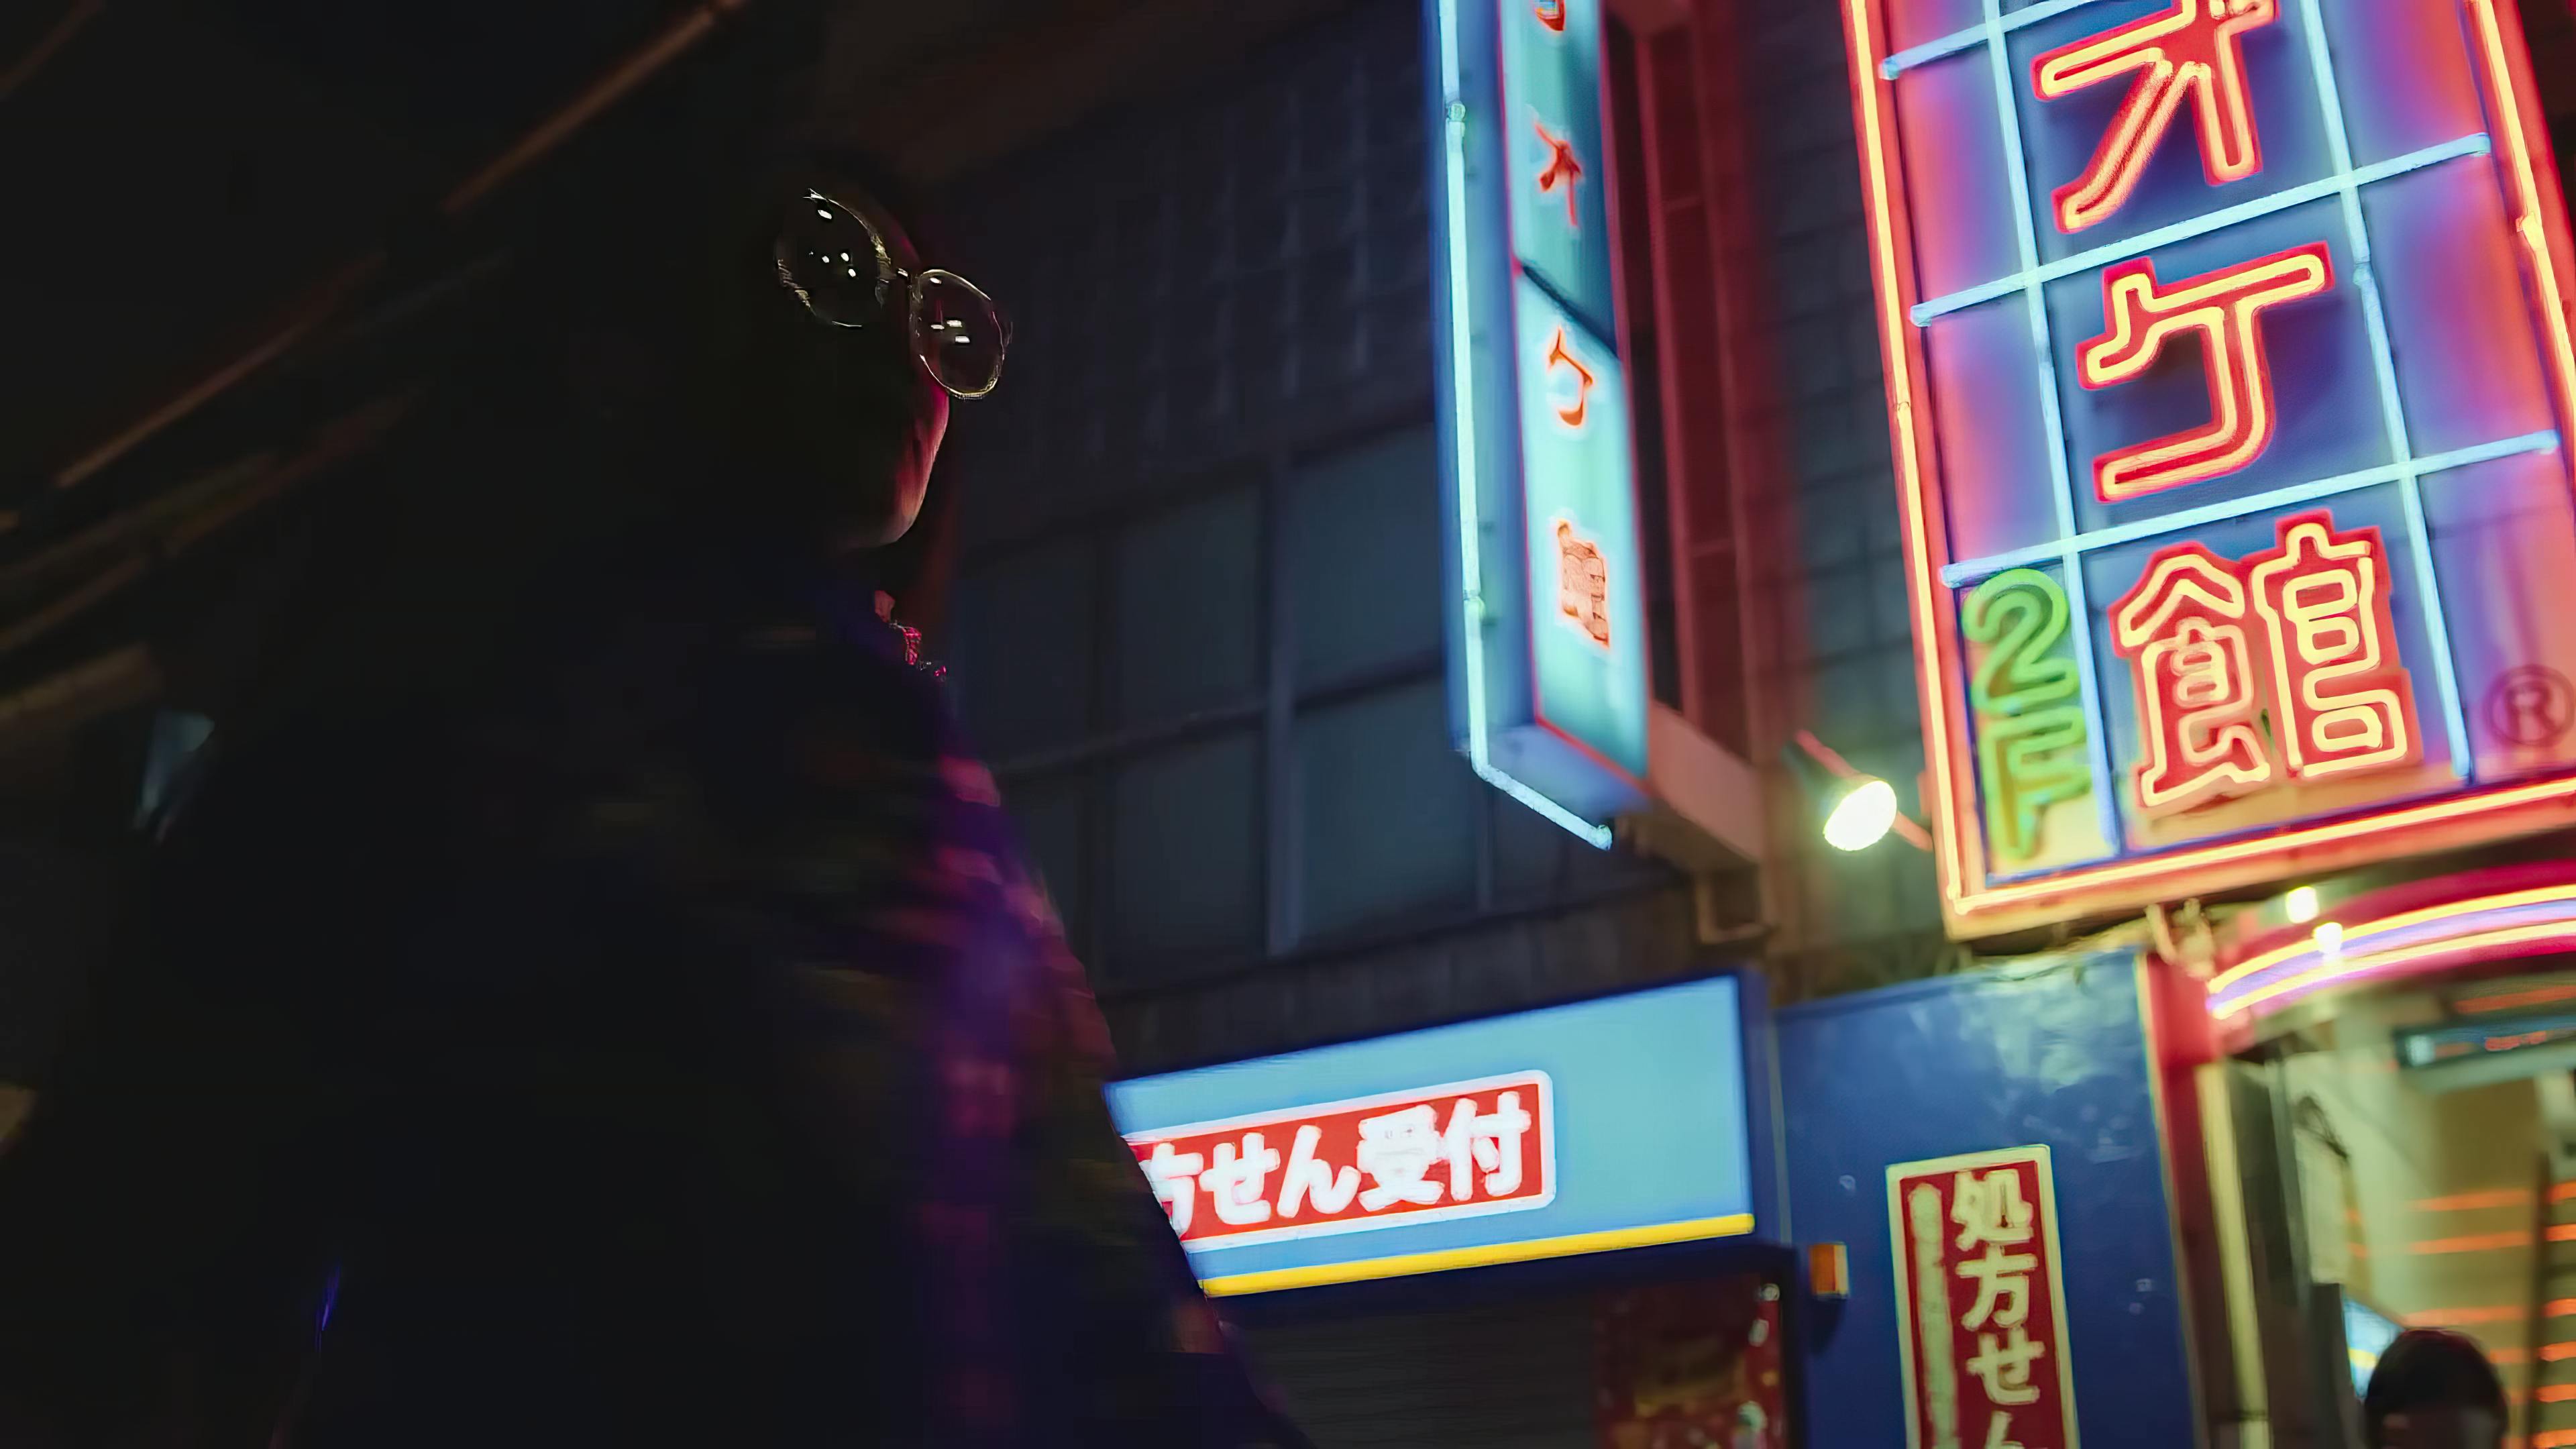 A silhouette of a person wearing round glasses facing neon-lit signage in a bustling urban night scene, evoking a sense of anticipation and the urban nightlife.